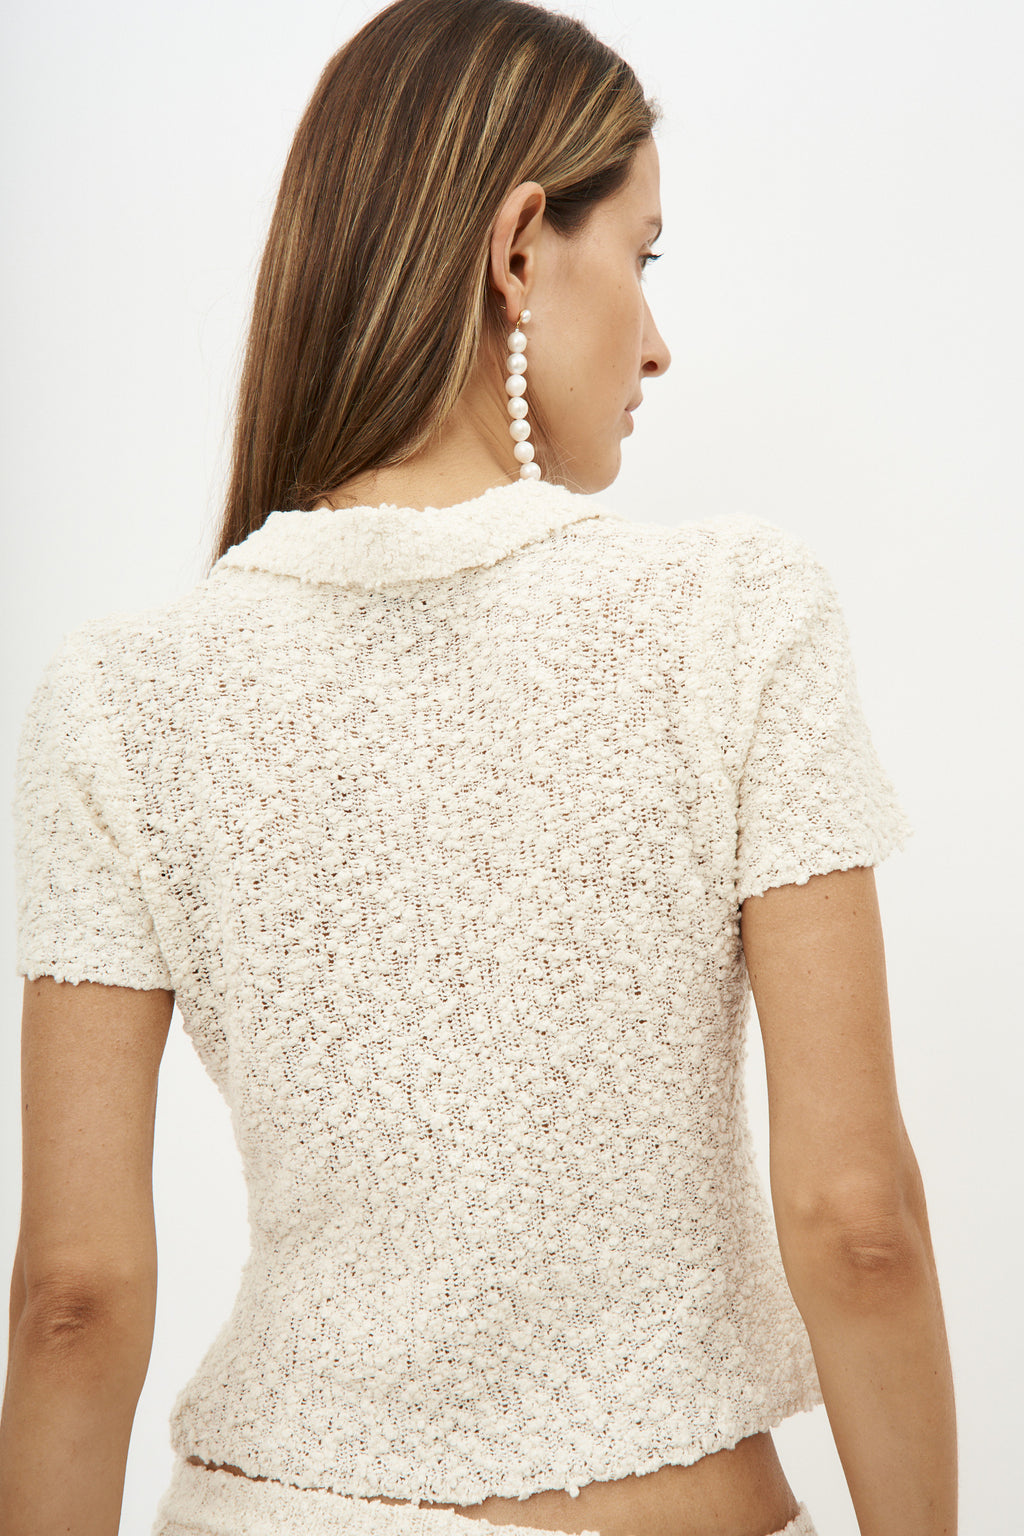 Boucle Knit Button Up Cream Top